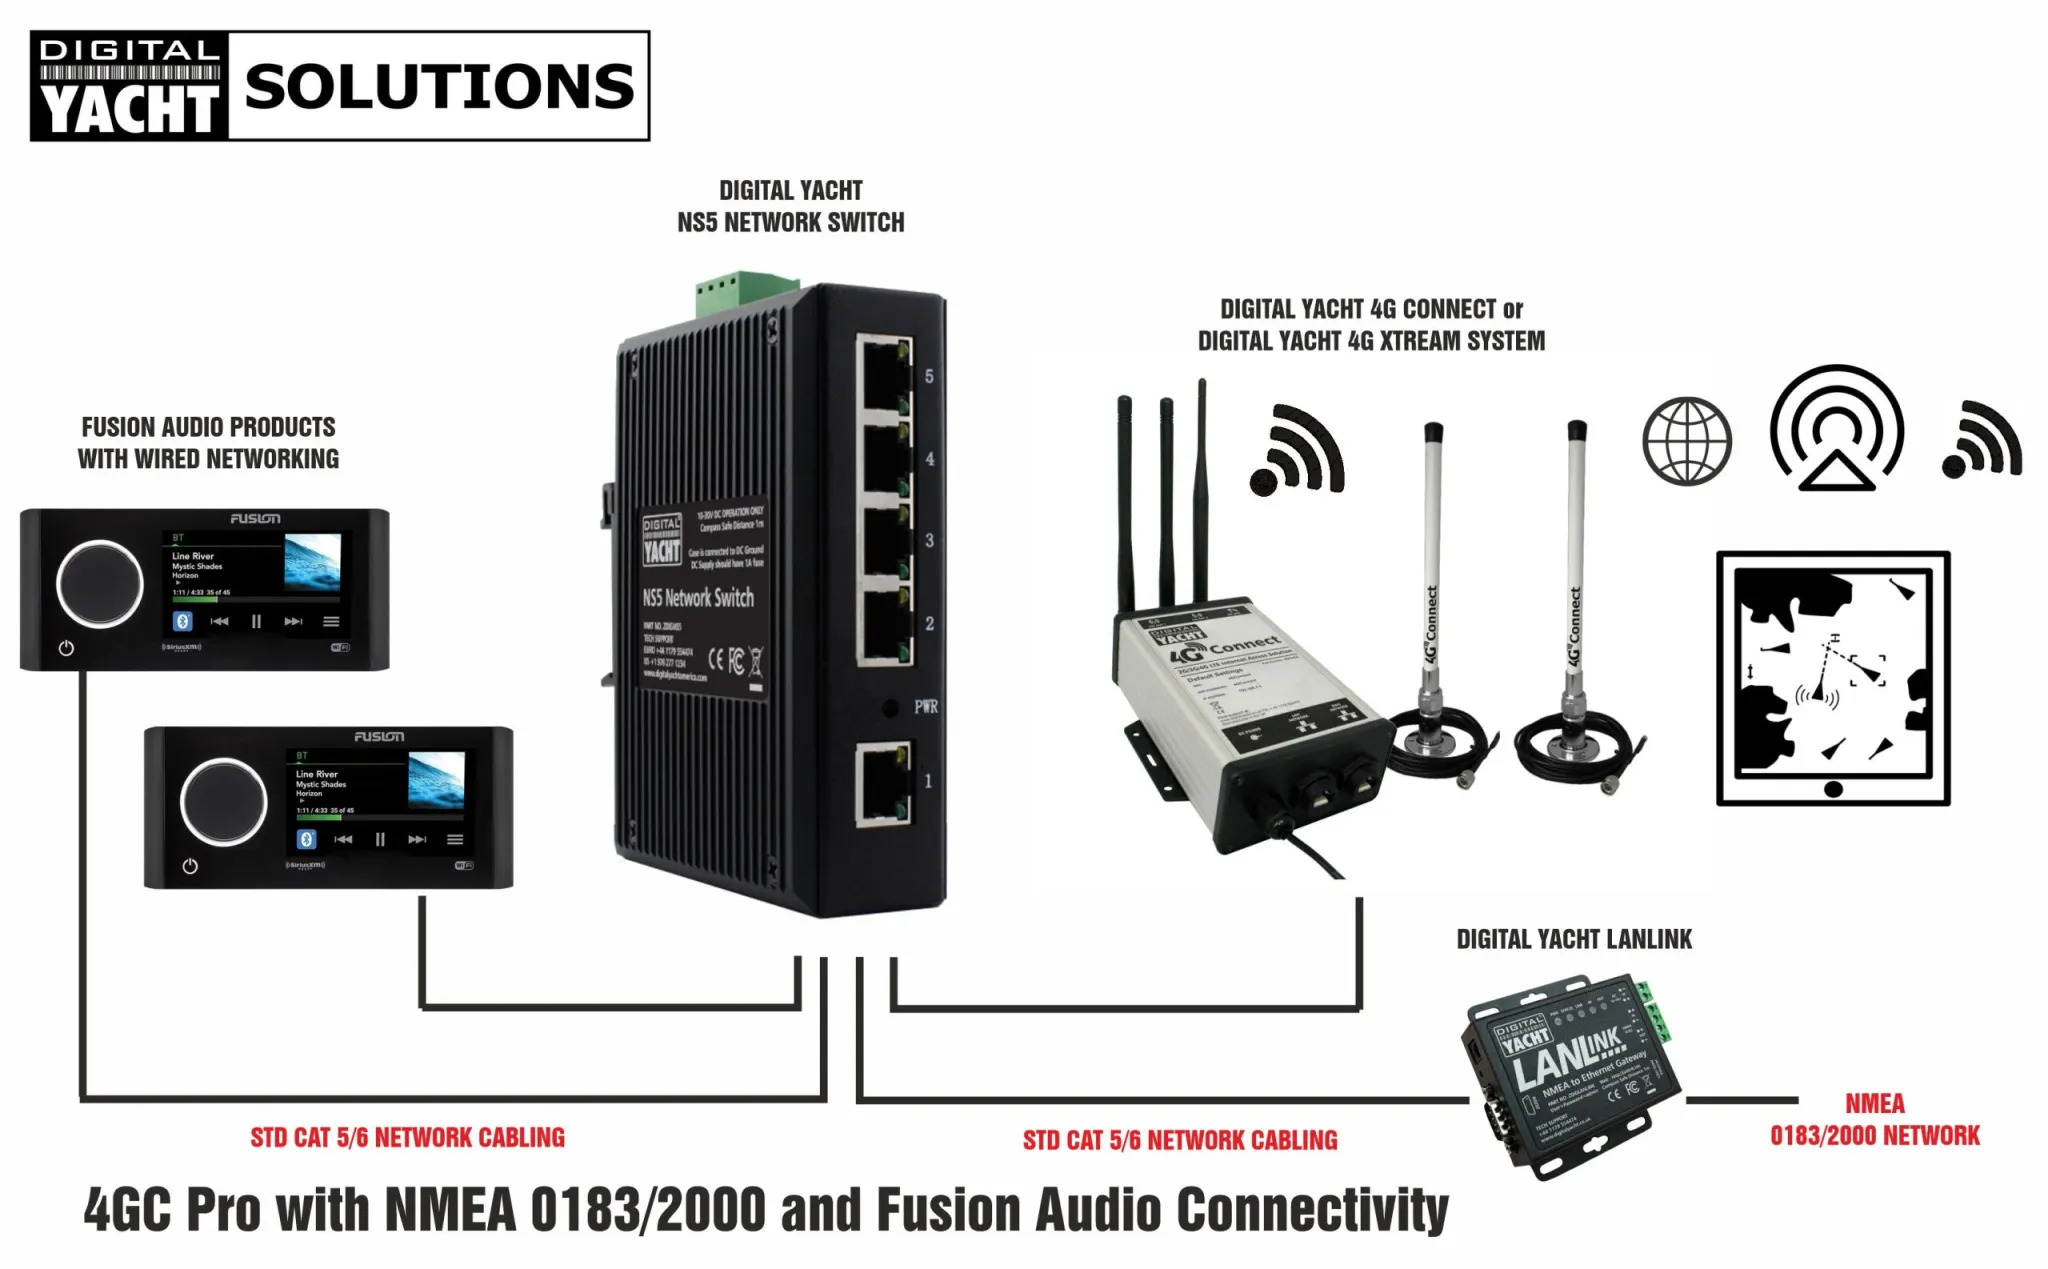 network-switch mit fusion audio fur boote